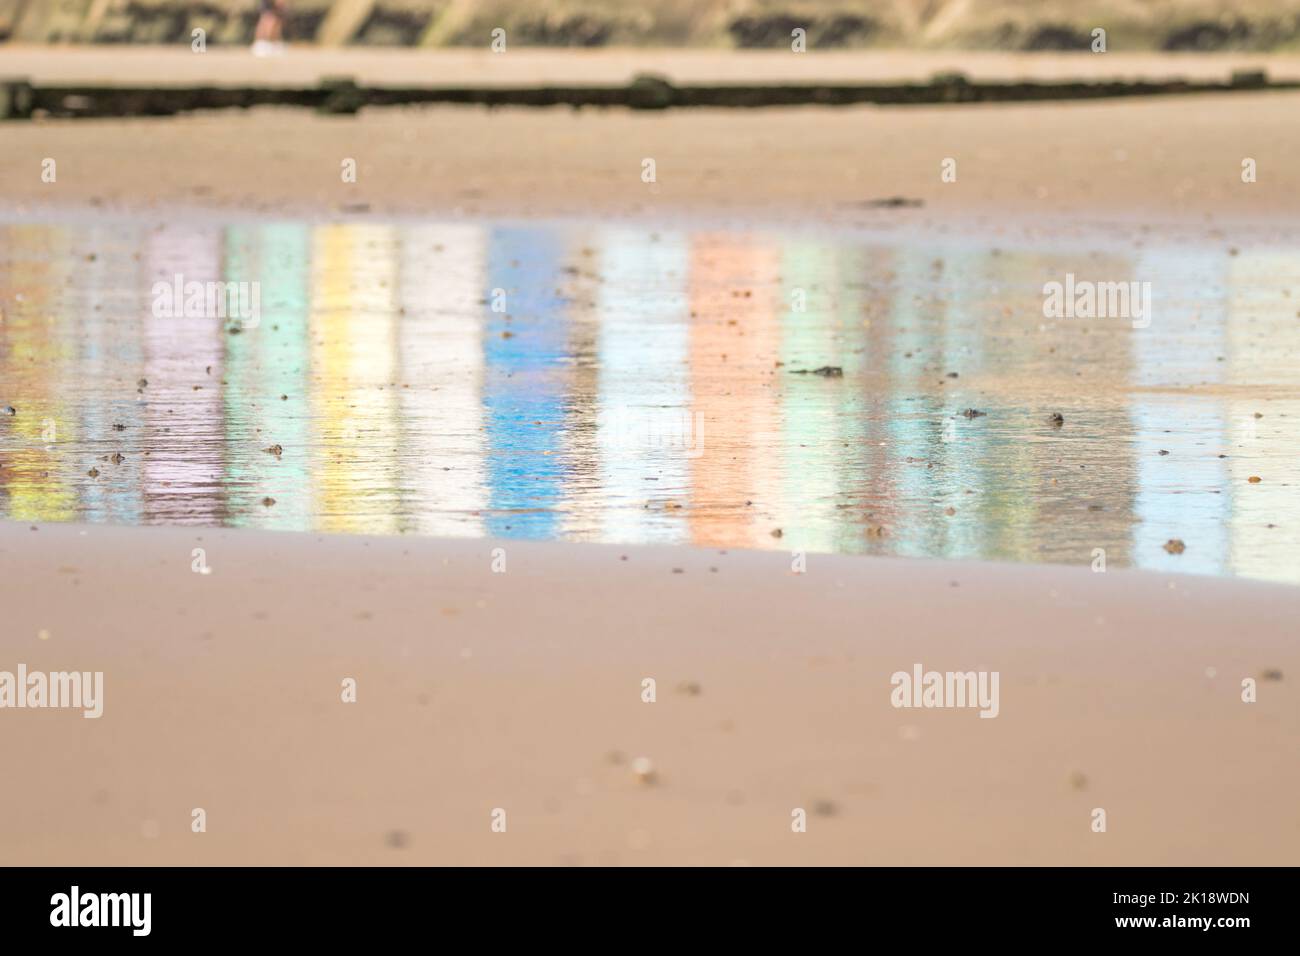 Reflections of multi-coloured beach huts on the wet sand at Walton on the naze Beach in Essex, United Kingdom Stock Photo